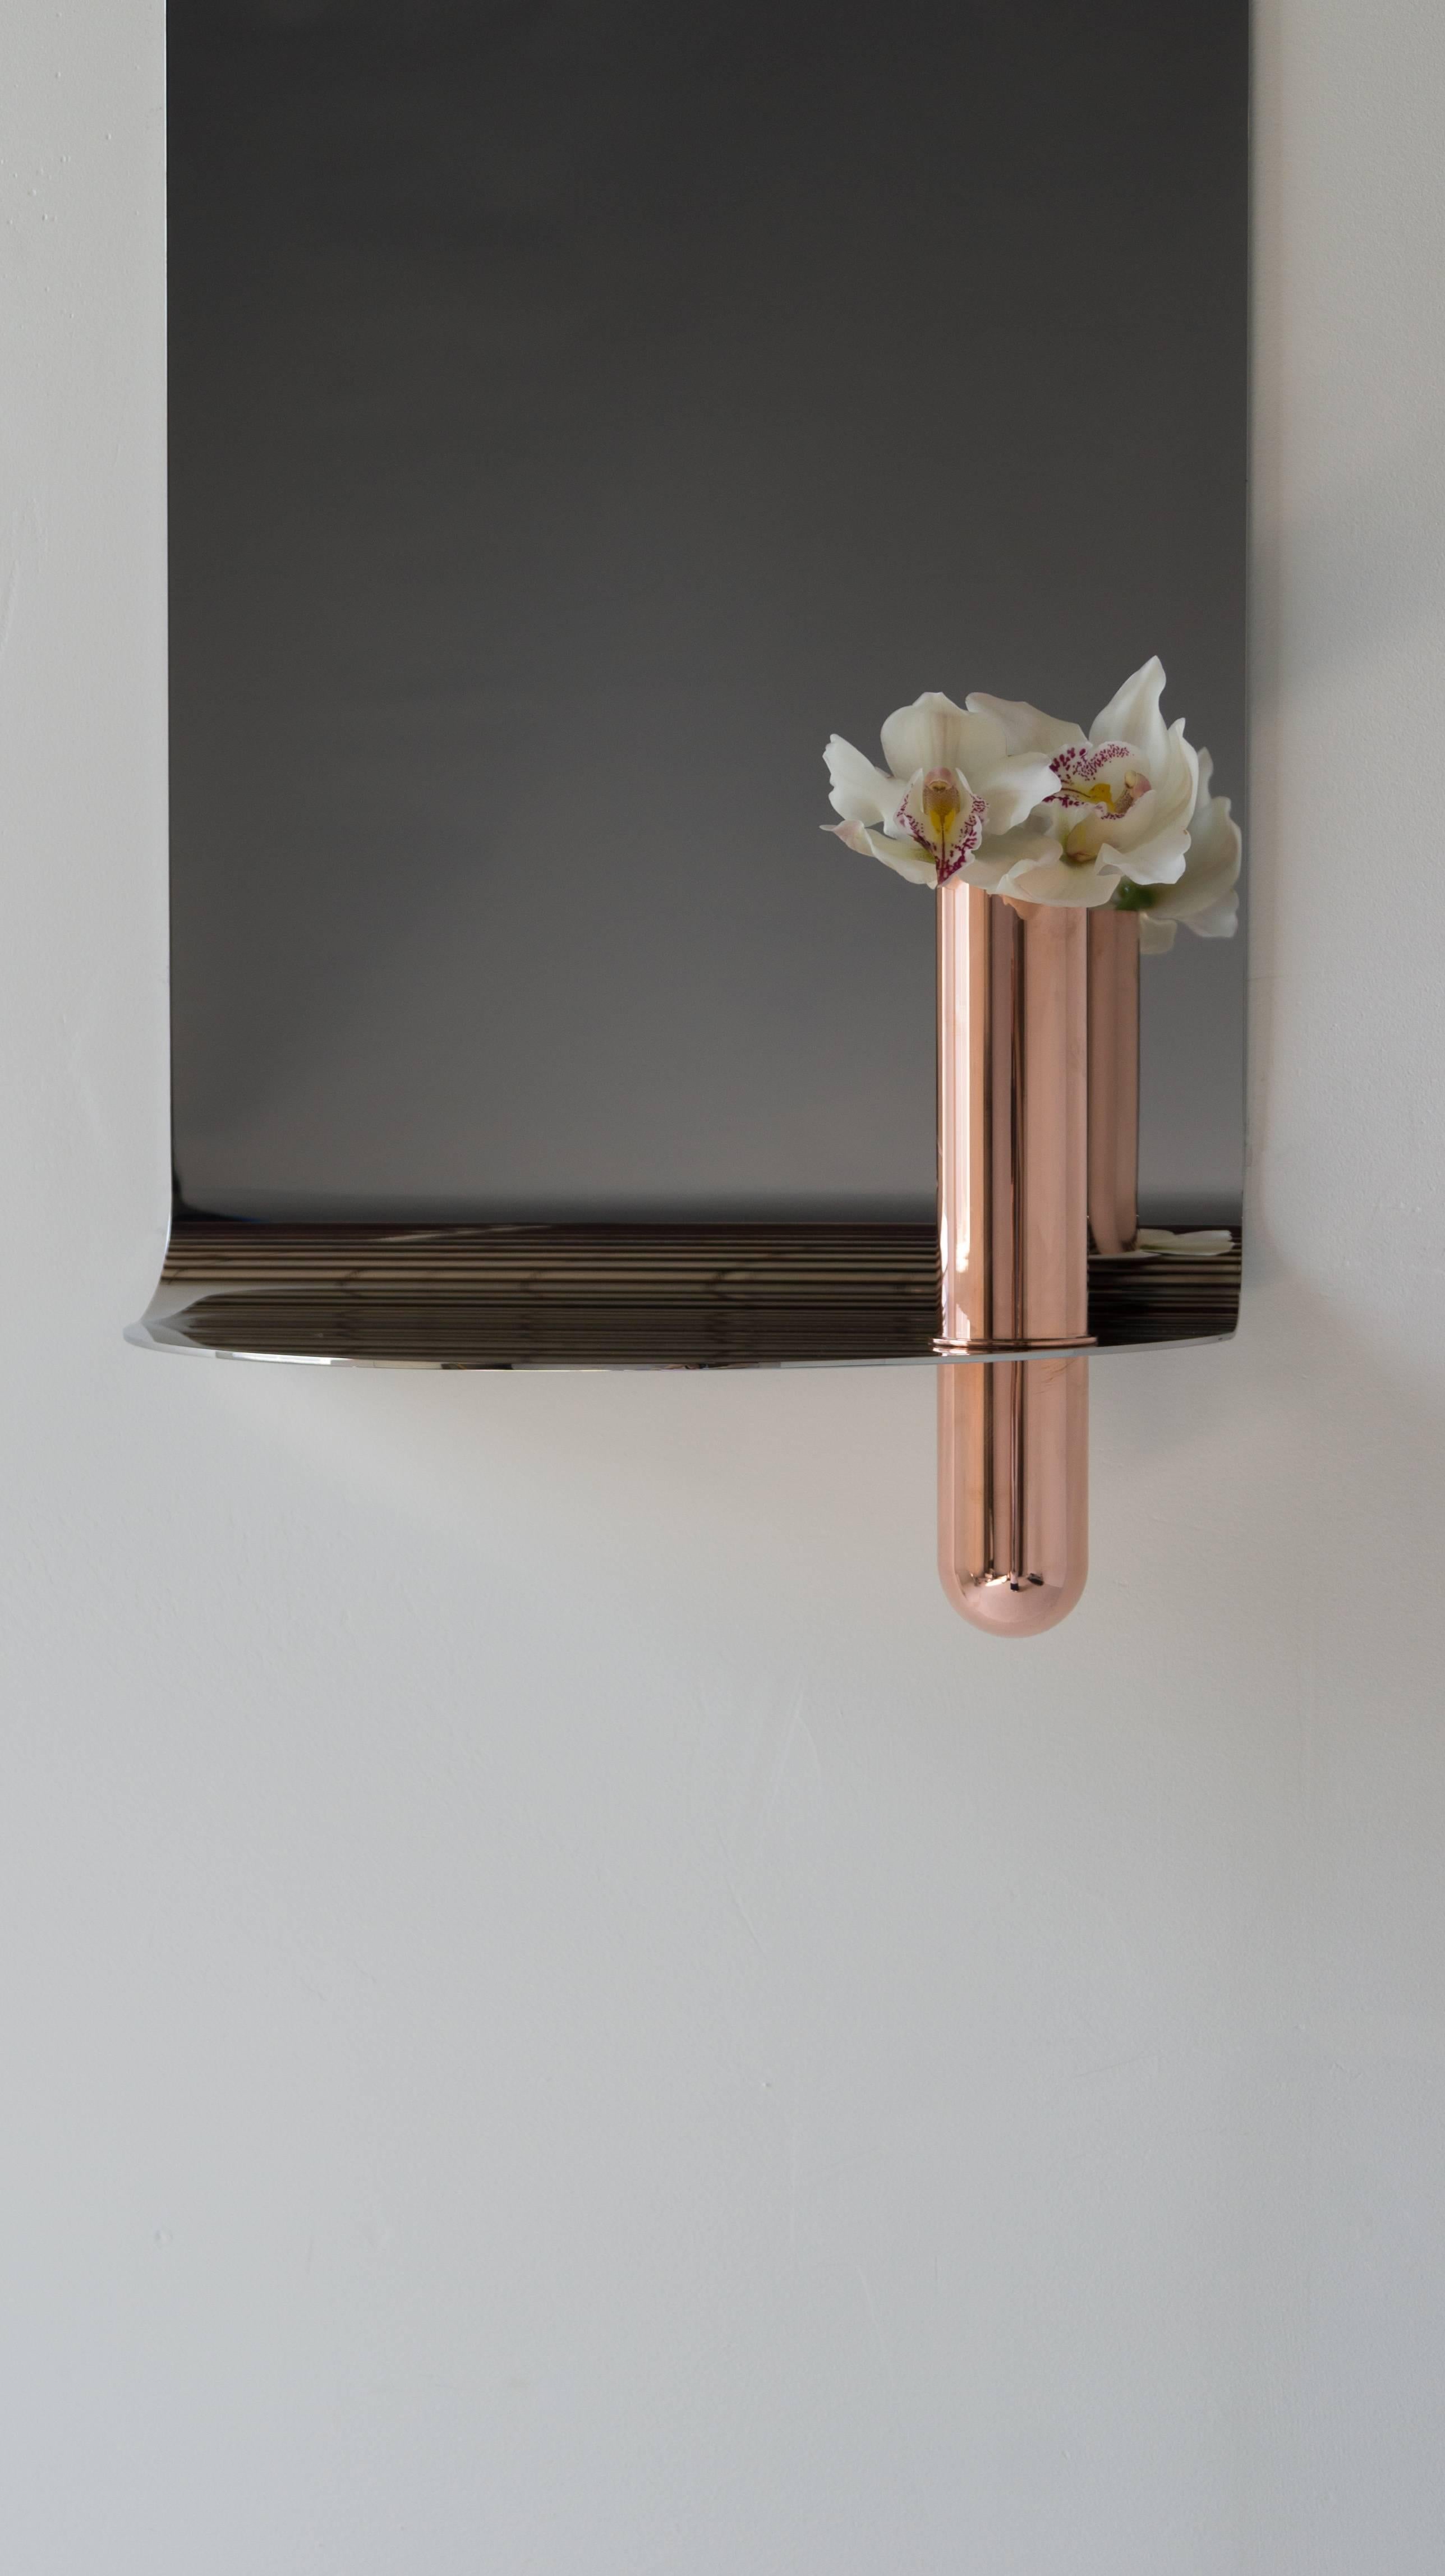 Polished Stainless Steel Mirror with Brushed Copper Vase by Birnam Wood Studio For Sale